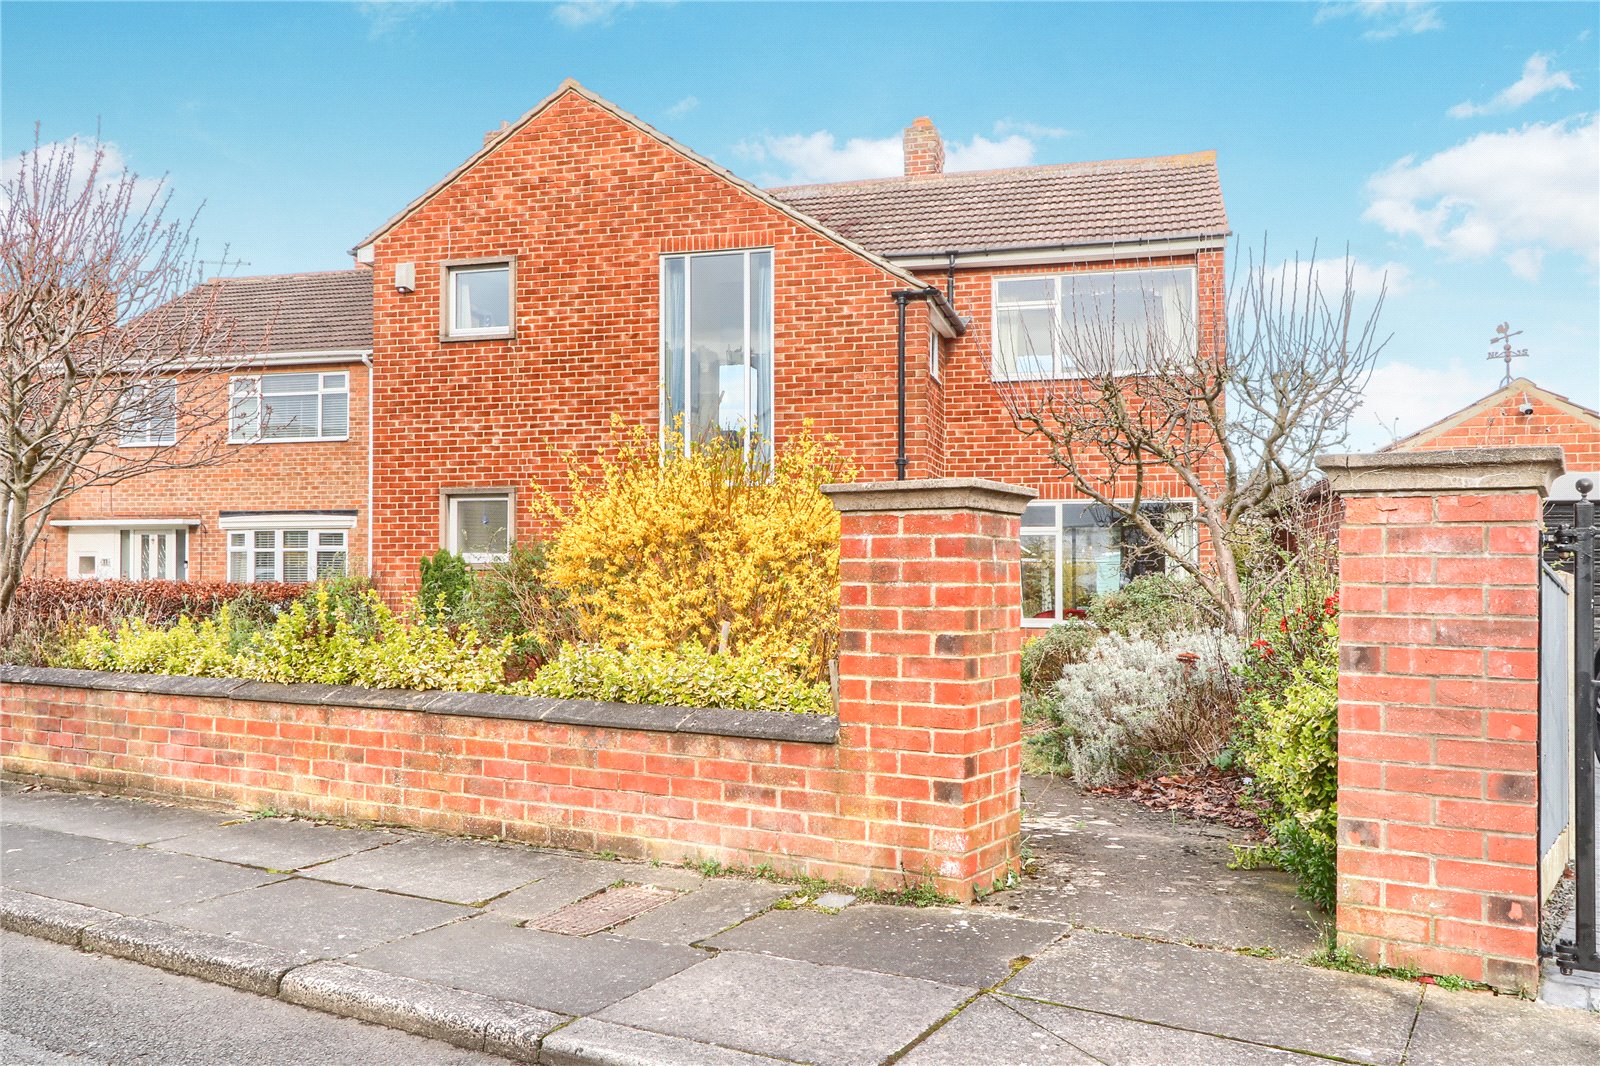 3 bed house for sale in Whitehouse Drive, Fairfield - Property Image 1